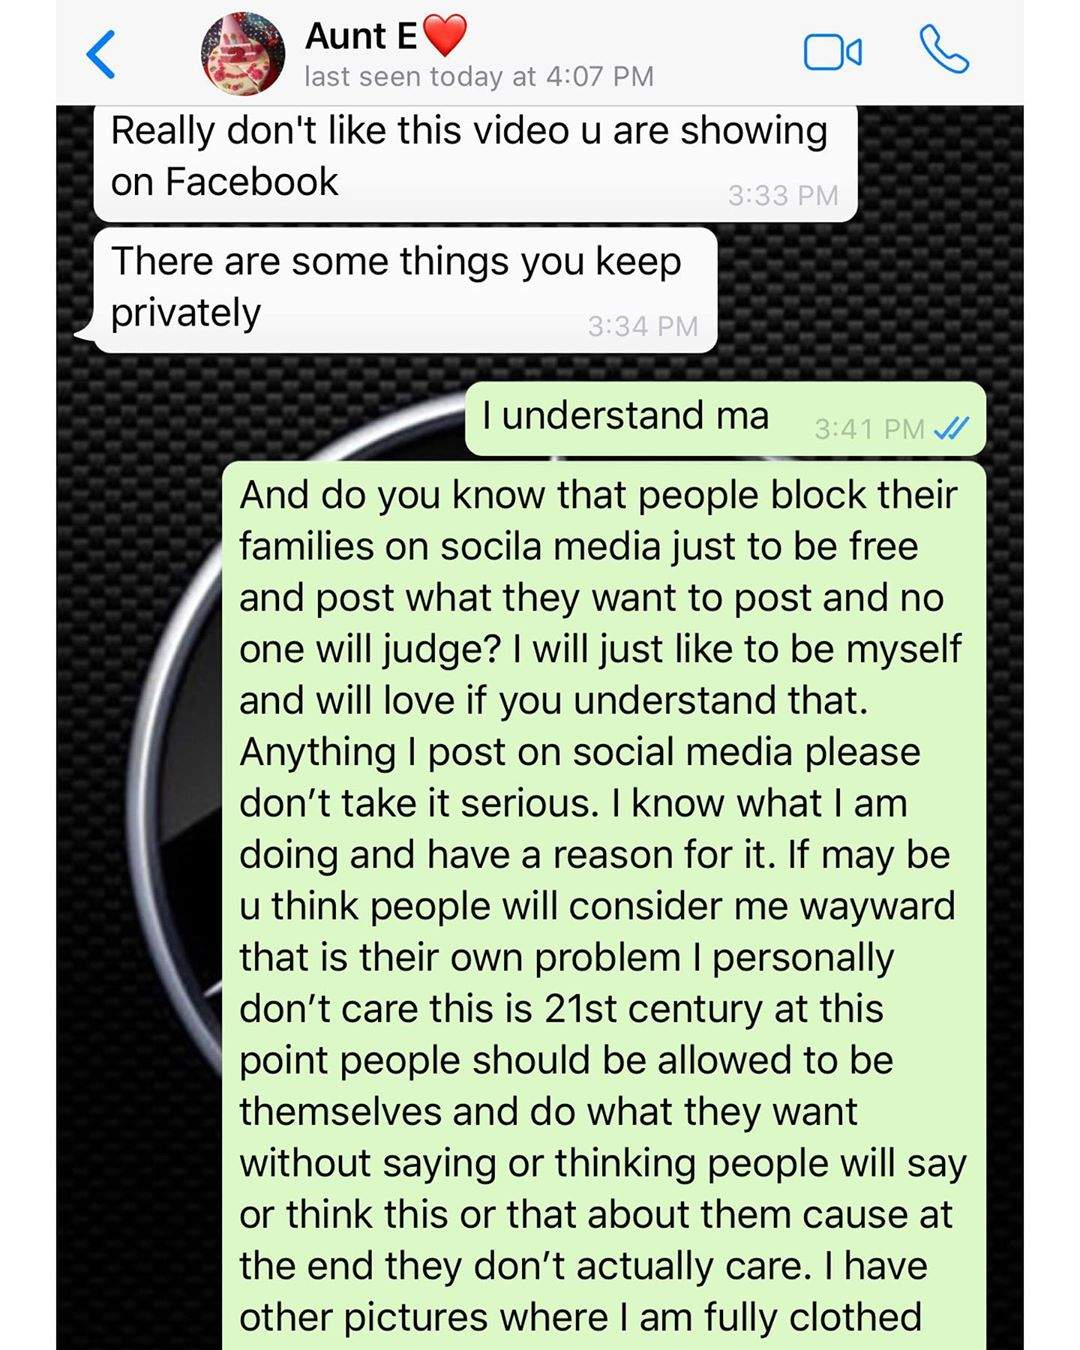 Nigerian lady shares her response to an aunt who's uncomfortable with her social media post